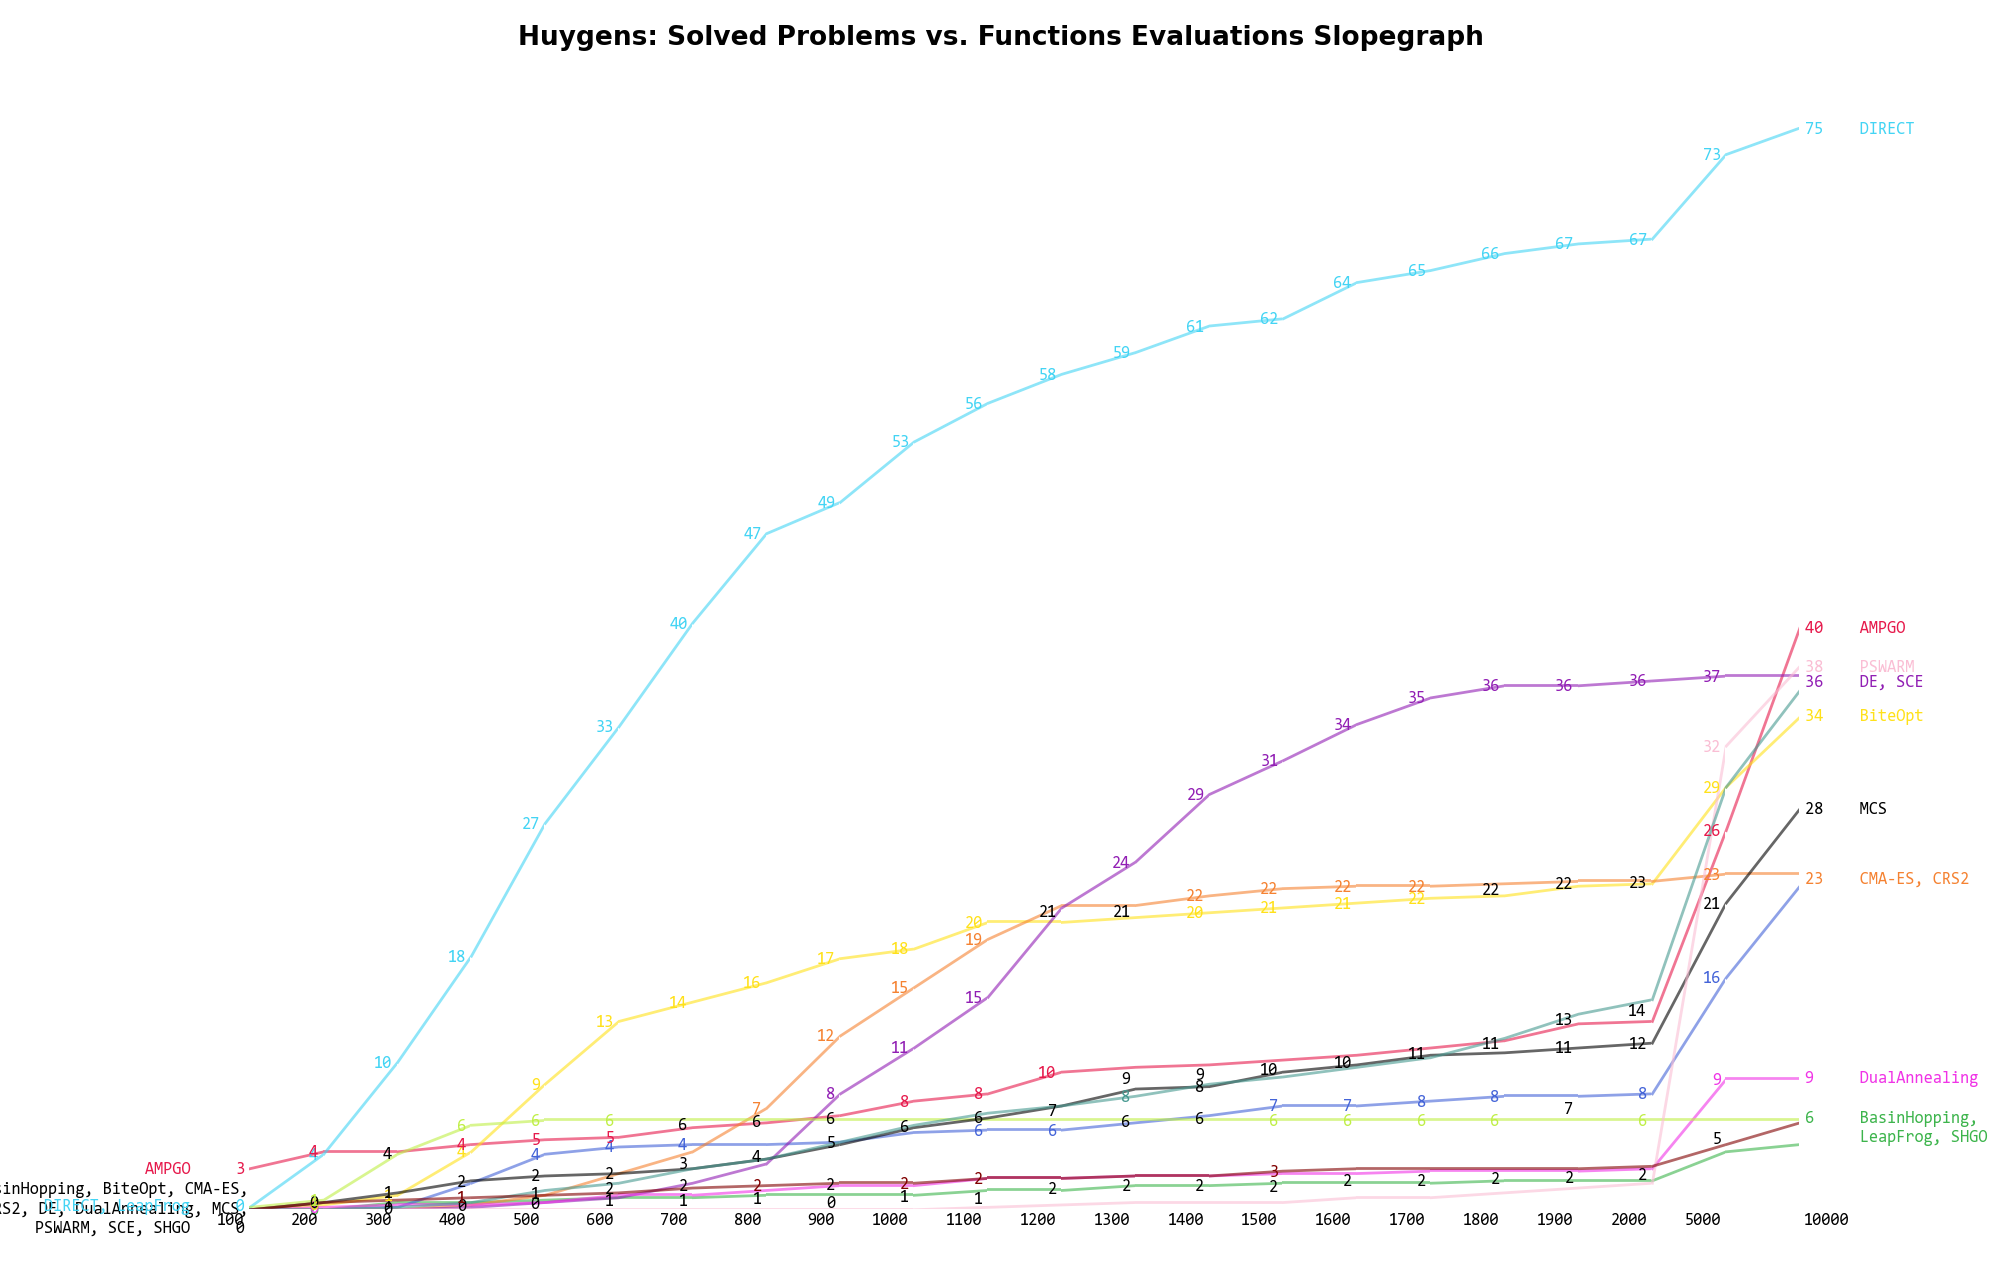 Percentage of problems solved given a fixed number of function evaluations on the Huygens test suite